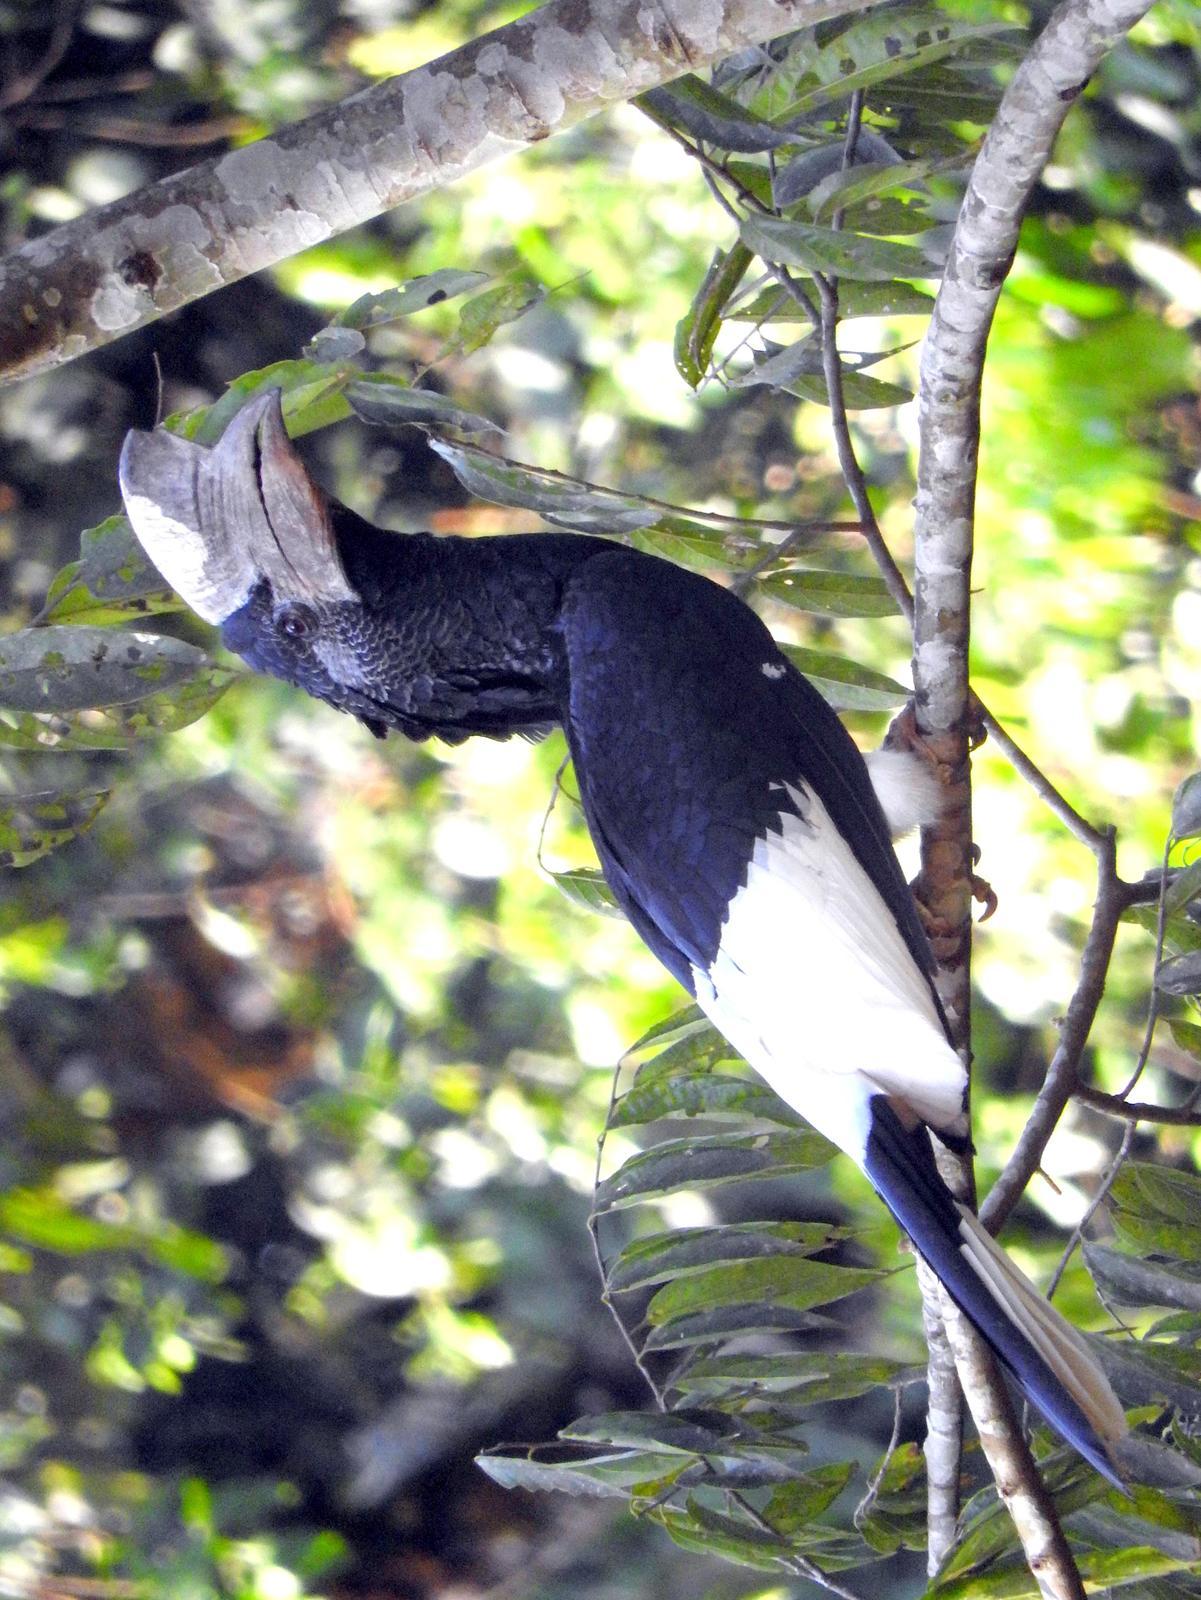 Black-and-white-casqued Hornbill Photo by Todd A. Watkins